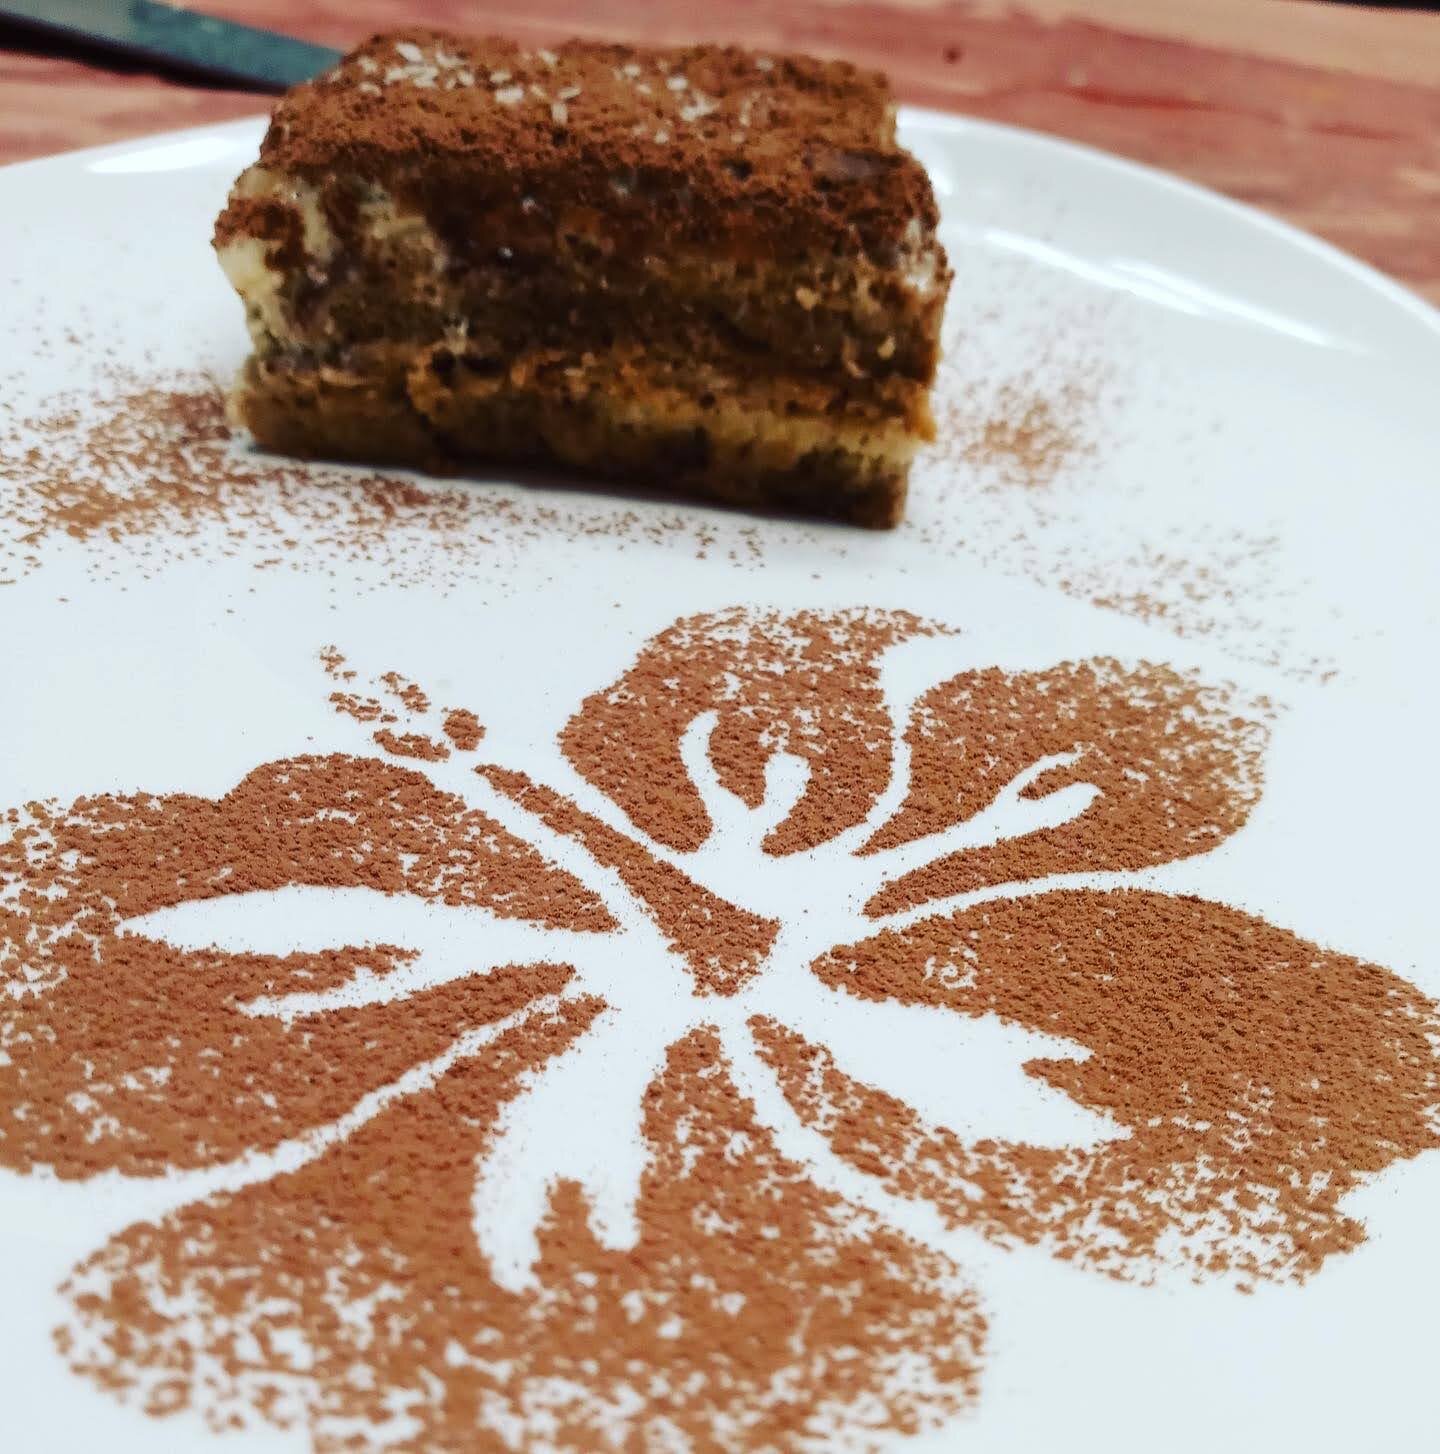 ✨Here is your late morning pick-me-up: tiramisu' ✨

Indulge in layers of creamy goodness and rich espresso flavors for the ultimate treat. Go ahead, savor a little slice of heaven today! 🍰✨ 

#ambrogiacc #enoteca #tiramisu #atasteofitaly #TiramisuDe